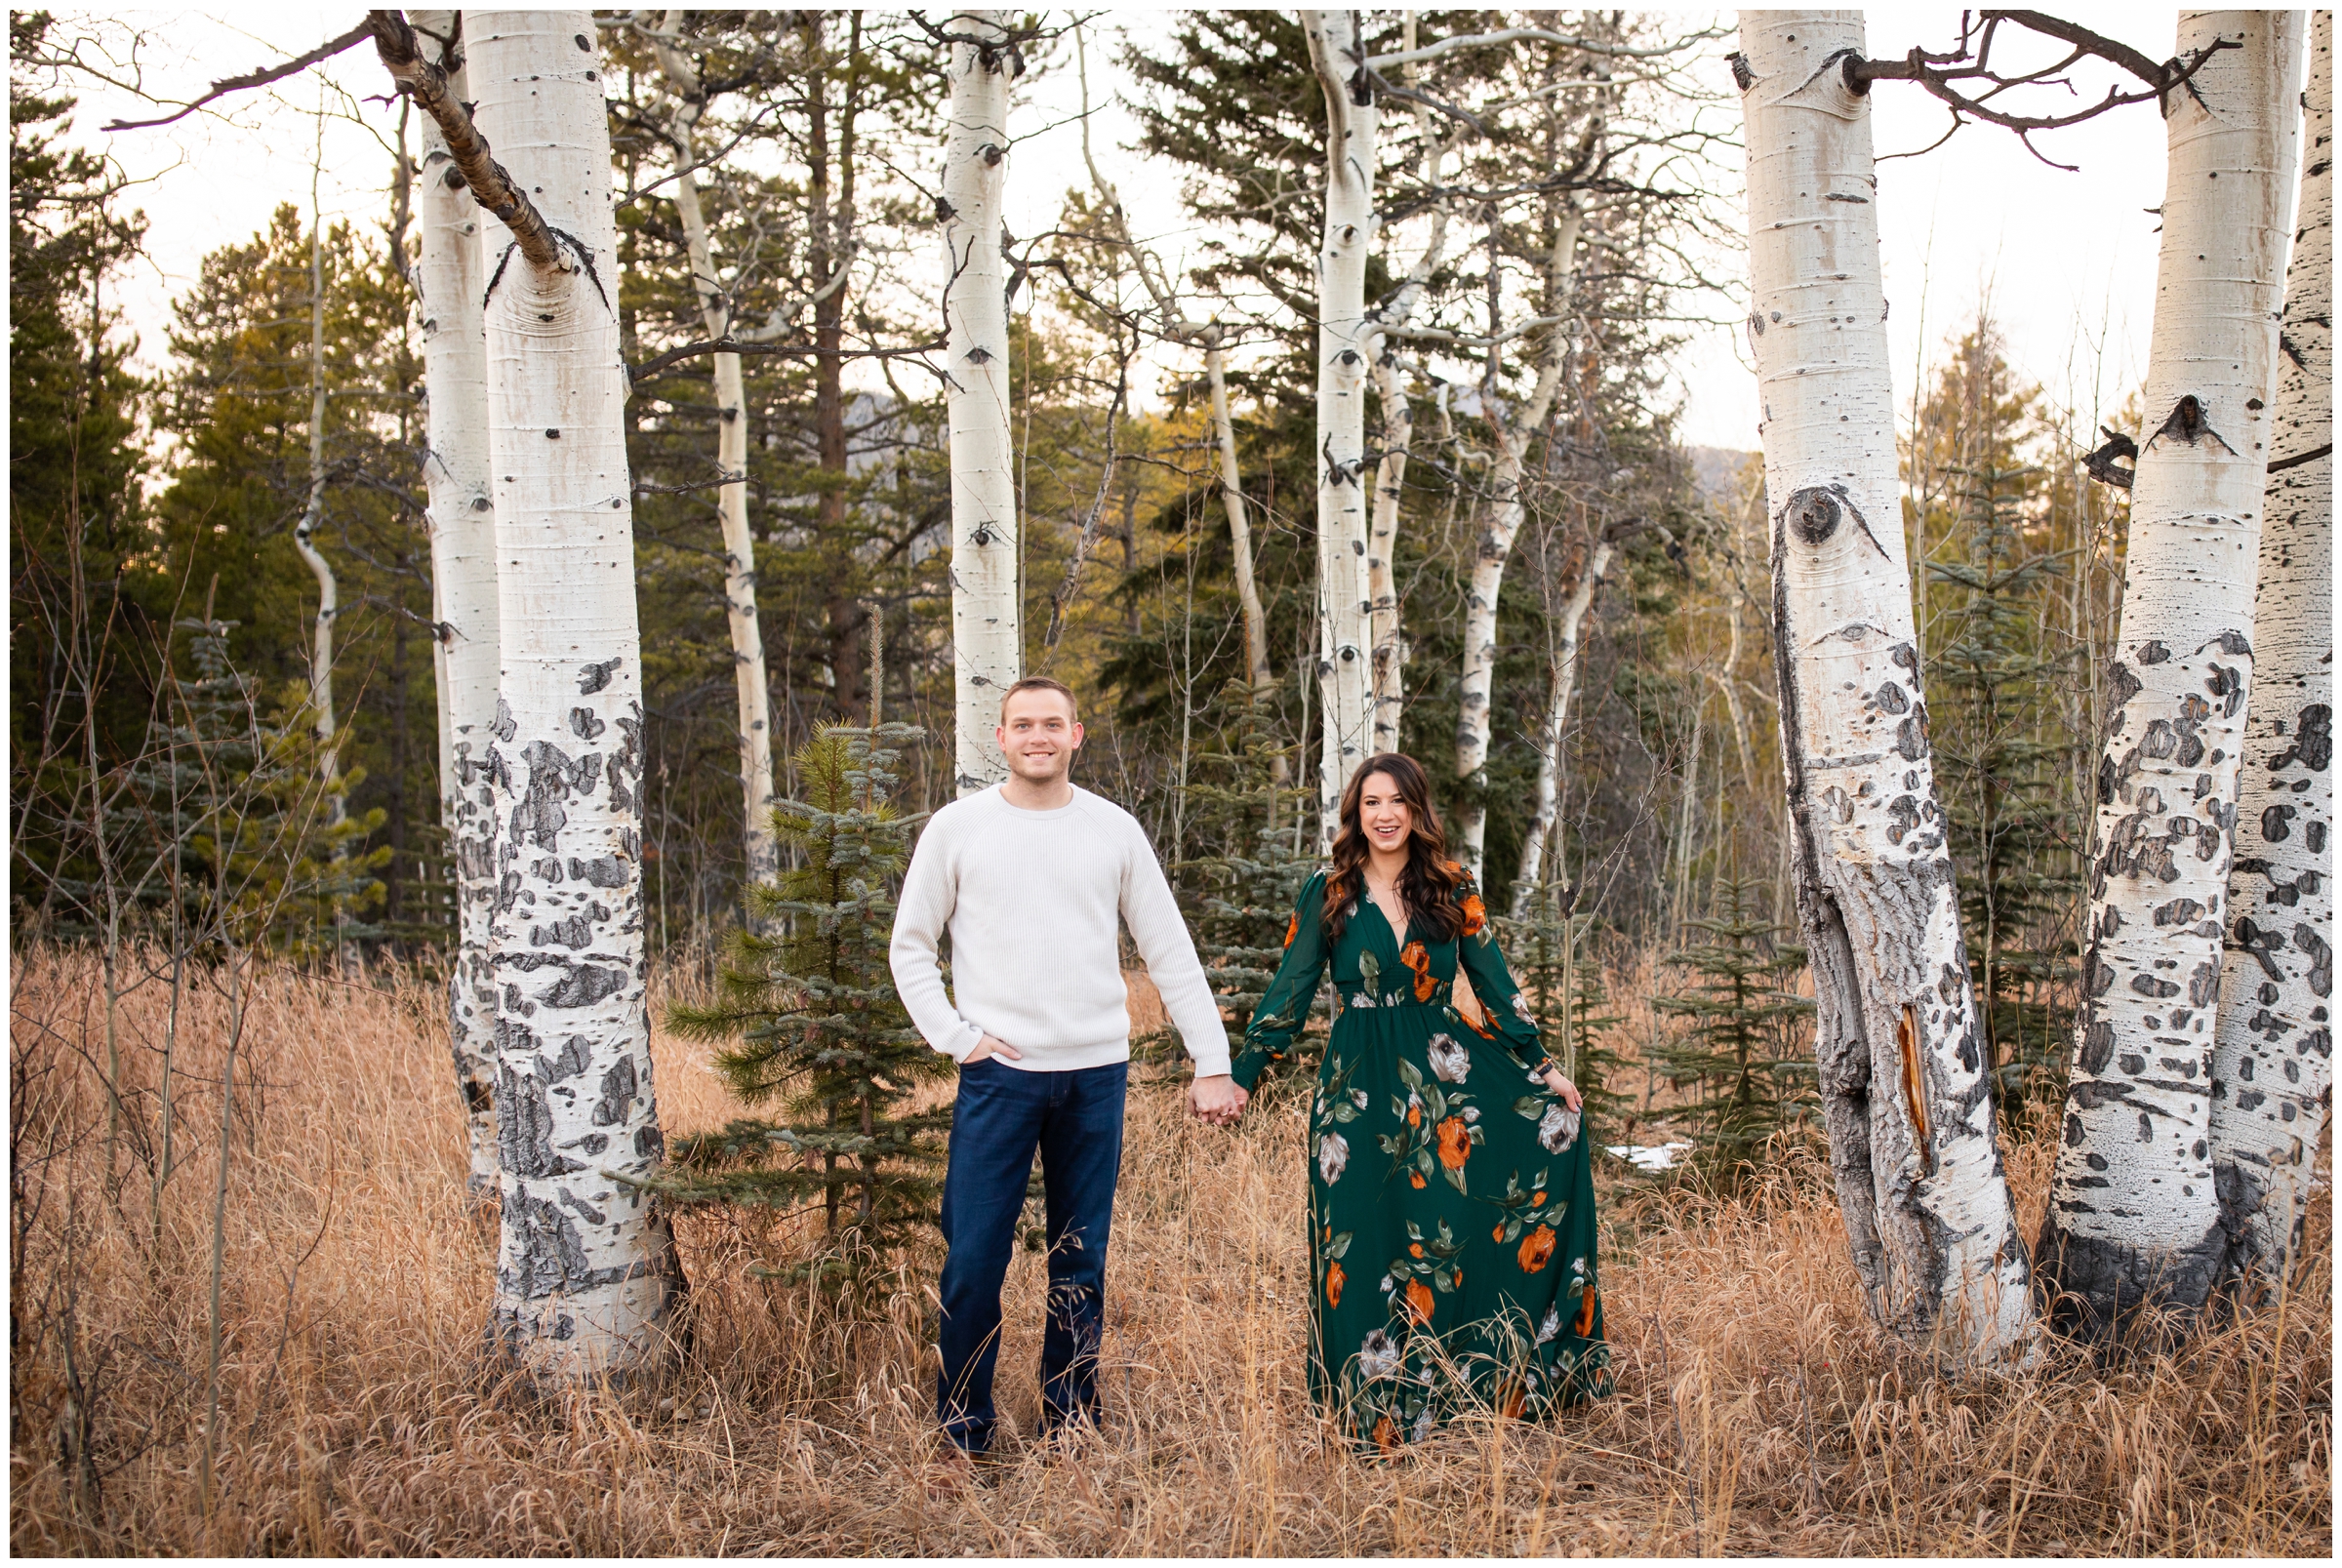 Fall couples photos in Colorado mountains by Evergreen portrait photographer Plum Pretty Photography